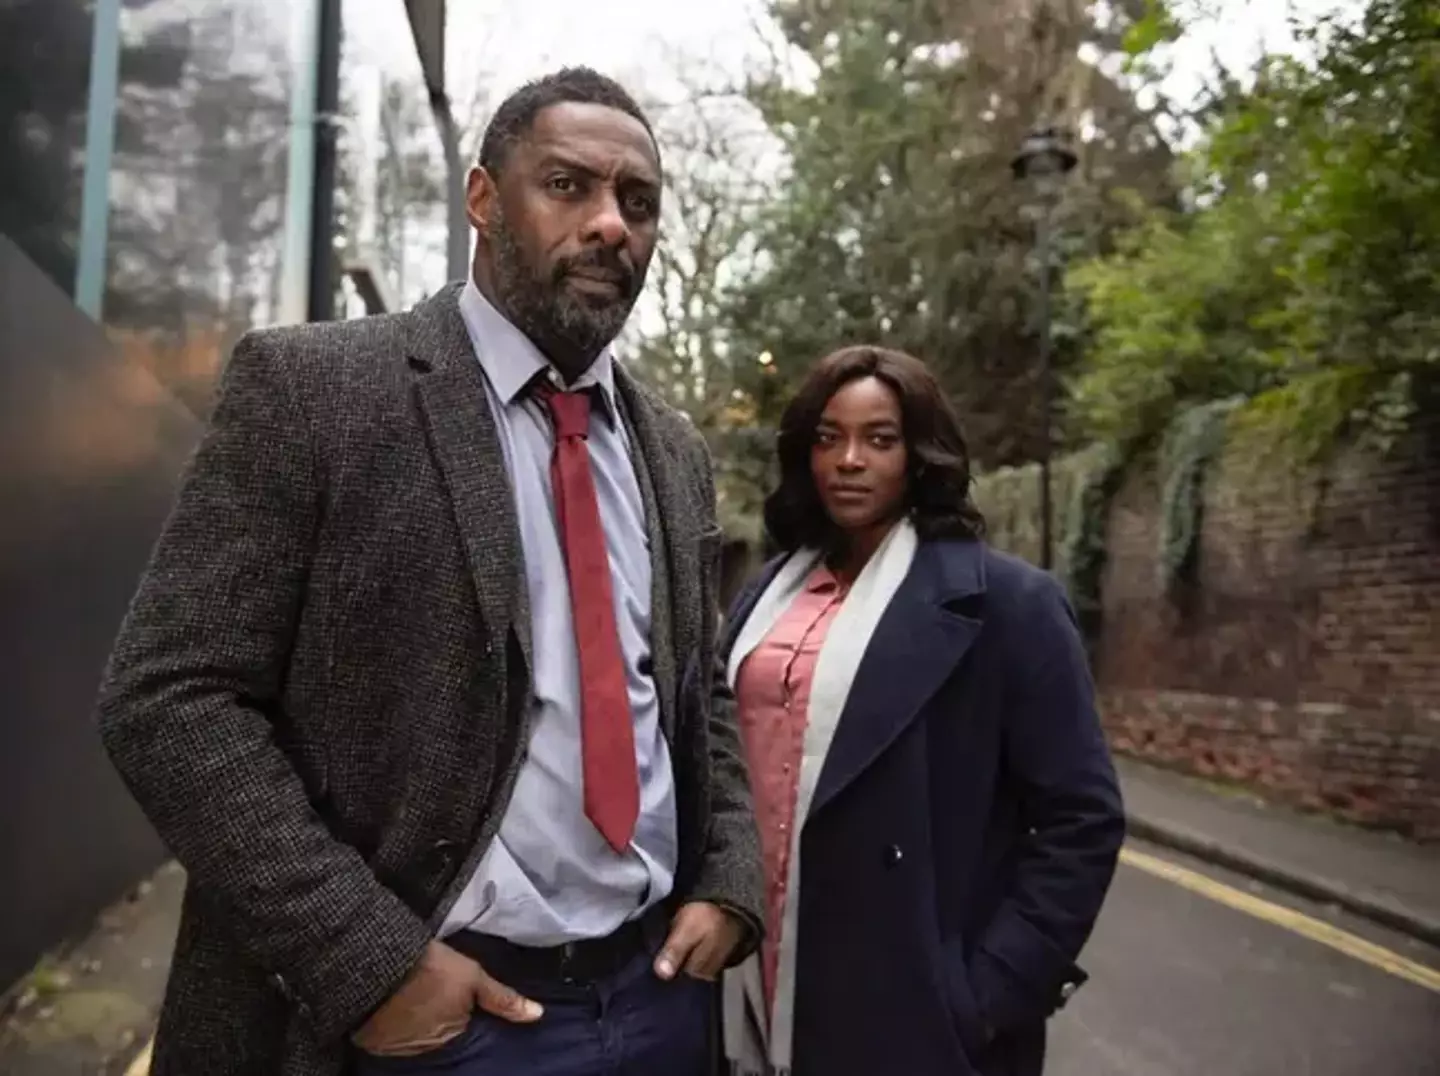 Fans can't wait for Luther's big screen debut.